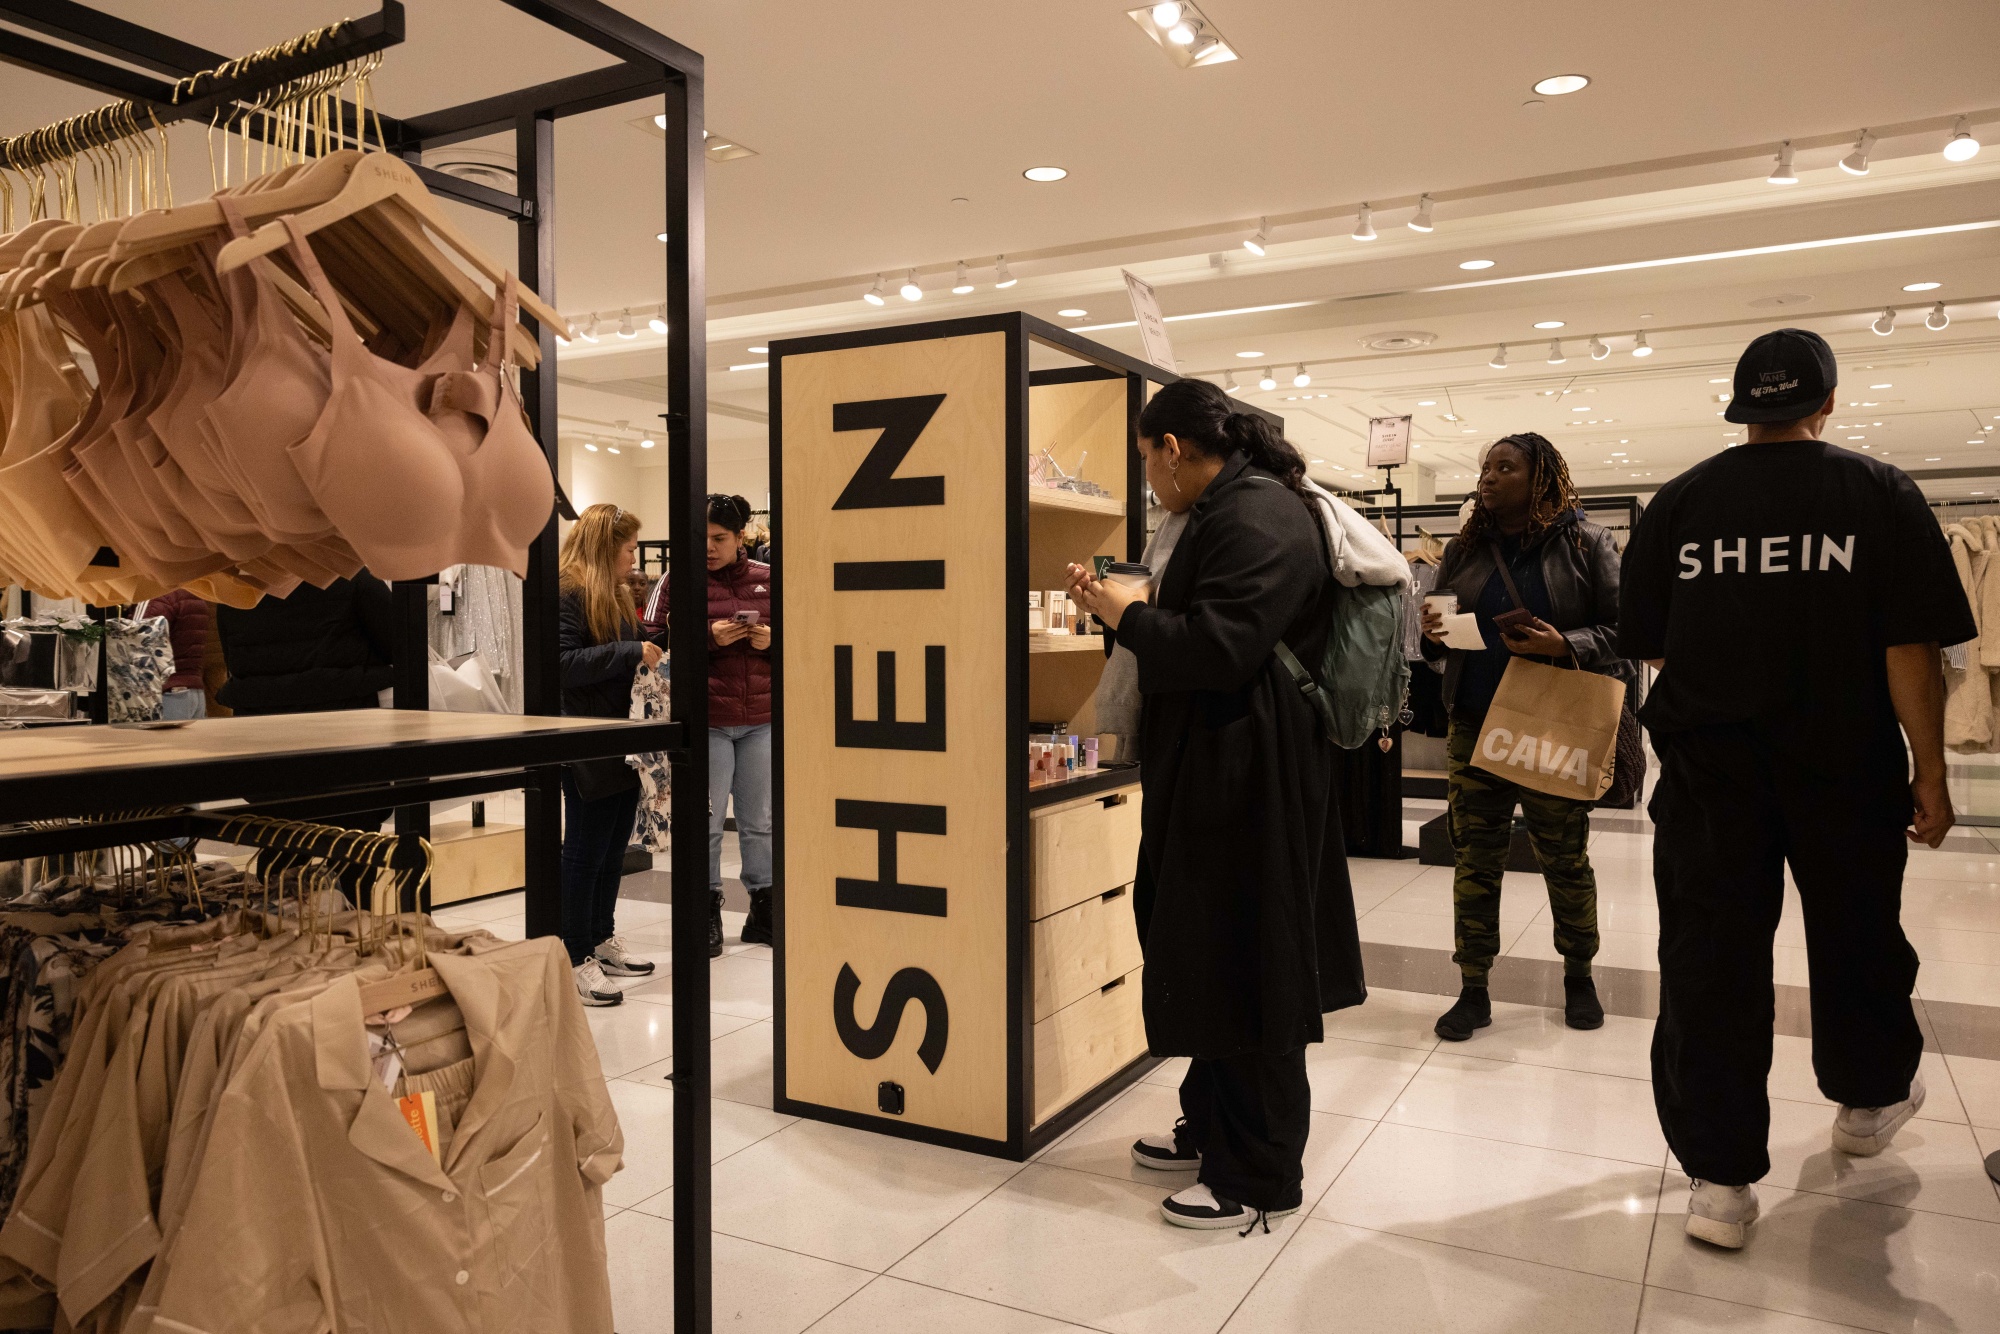 Shein 'Facing Cybersecurity Review' in China Ahead of US IPO